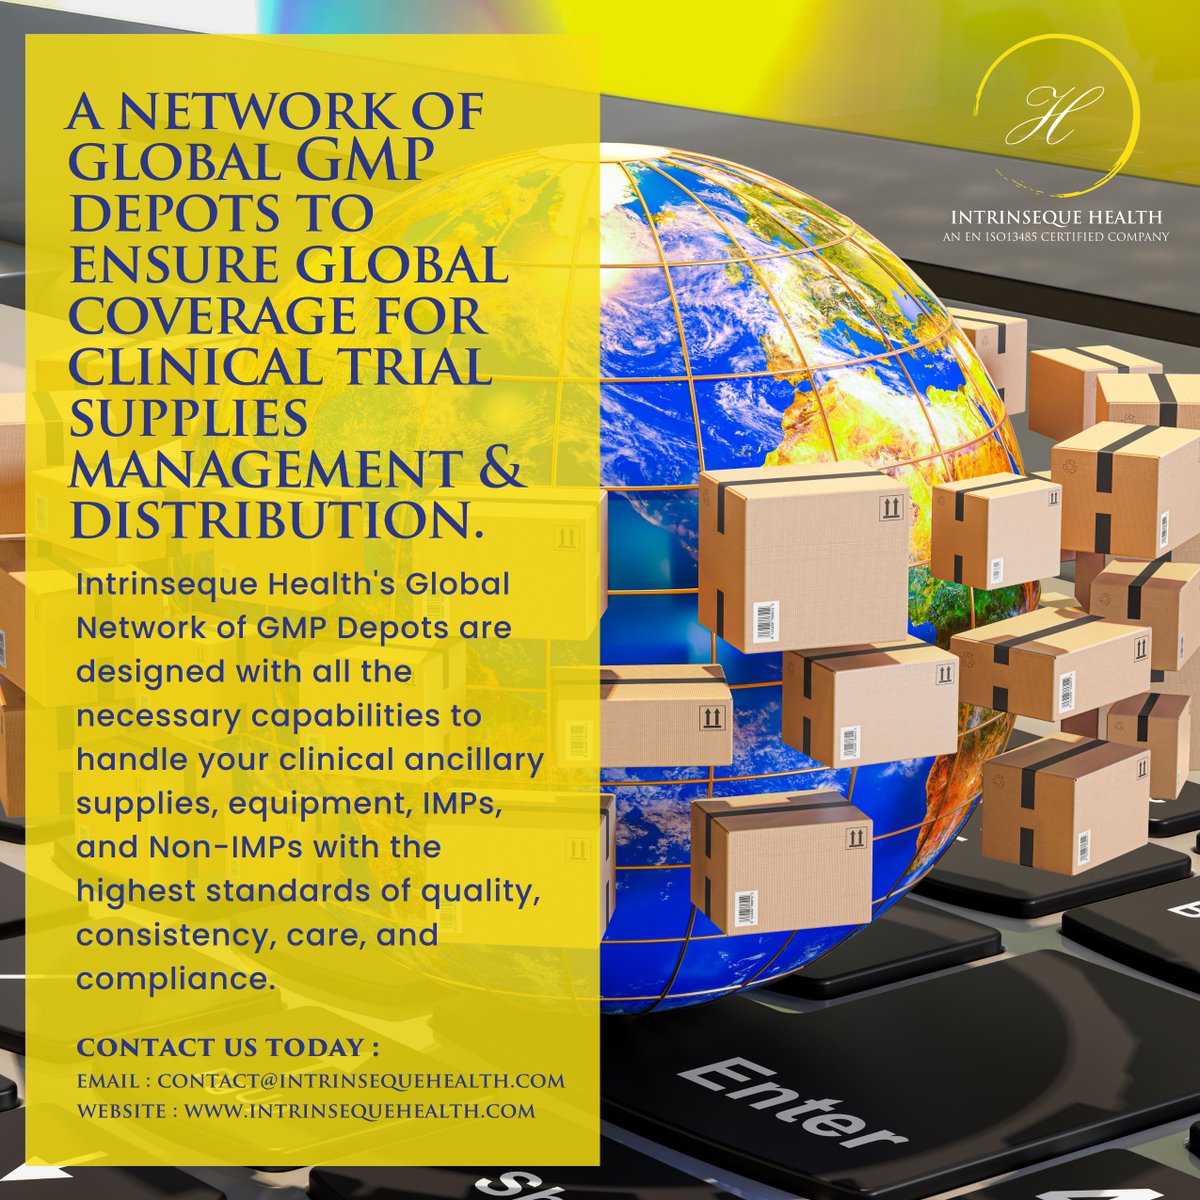 Intrinseque Health's Global Network of GMP Depots are designed with all the necessary capabilities to handle your clinical ancillary supplies, equipment, IMPs, and Non-IMPs with the highest standards of quality, consistency, care, and compliance.

#drugdiscovery #drugdevelopment